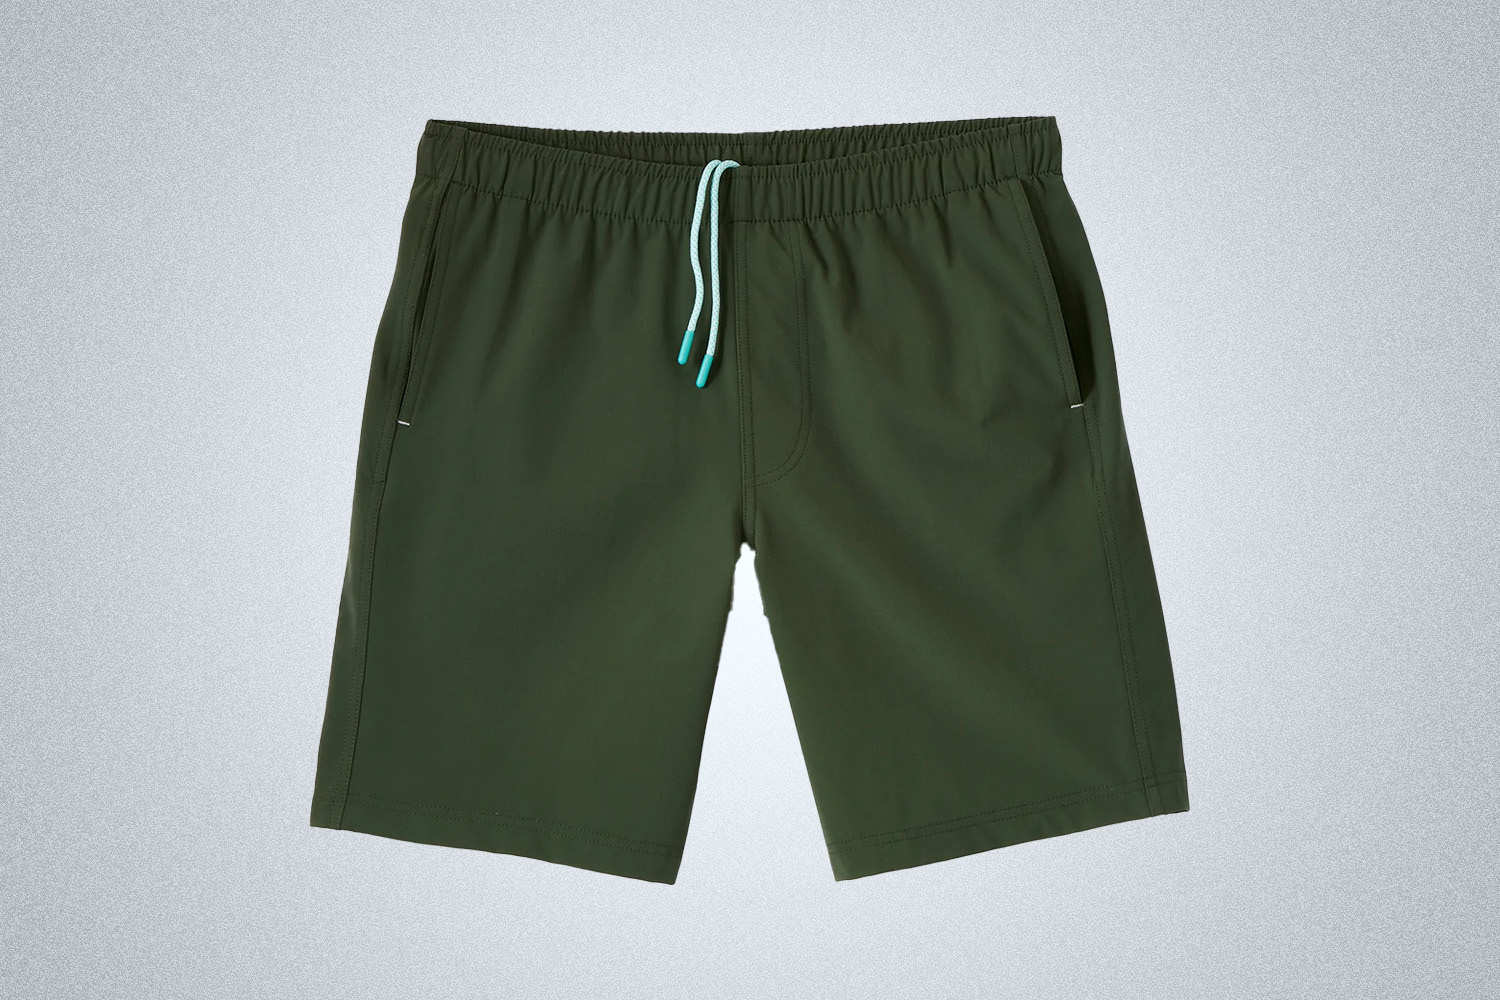 a pair of green shorts from Myles Apparel on a grey background